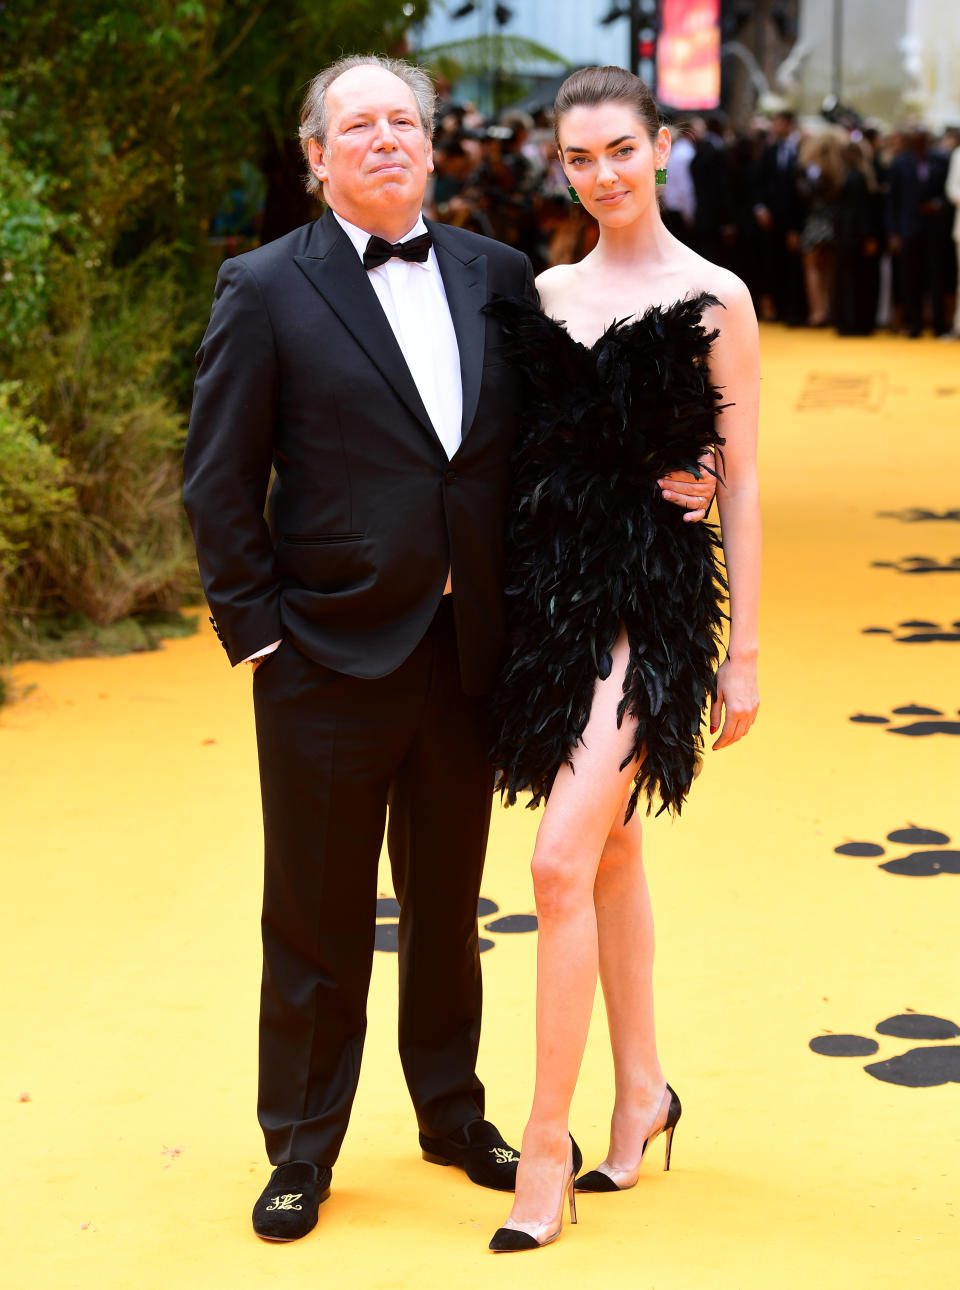 Hans Zimmer and Zoe Zimmer attending Disney's The Lion King European Premiere held in Leicester Square, London.